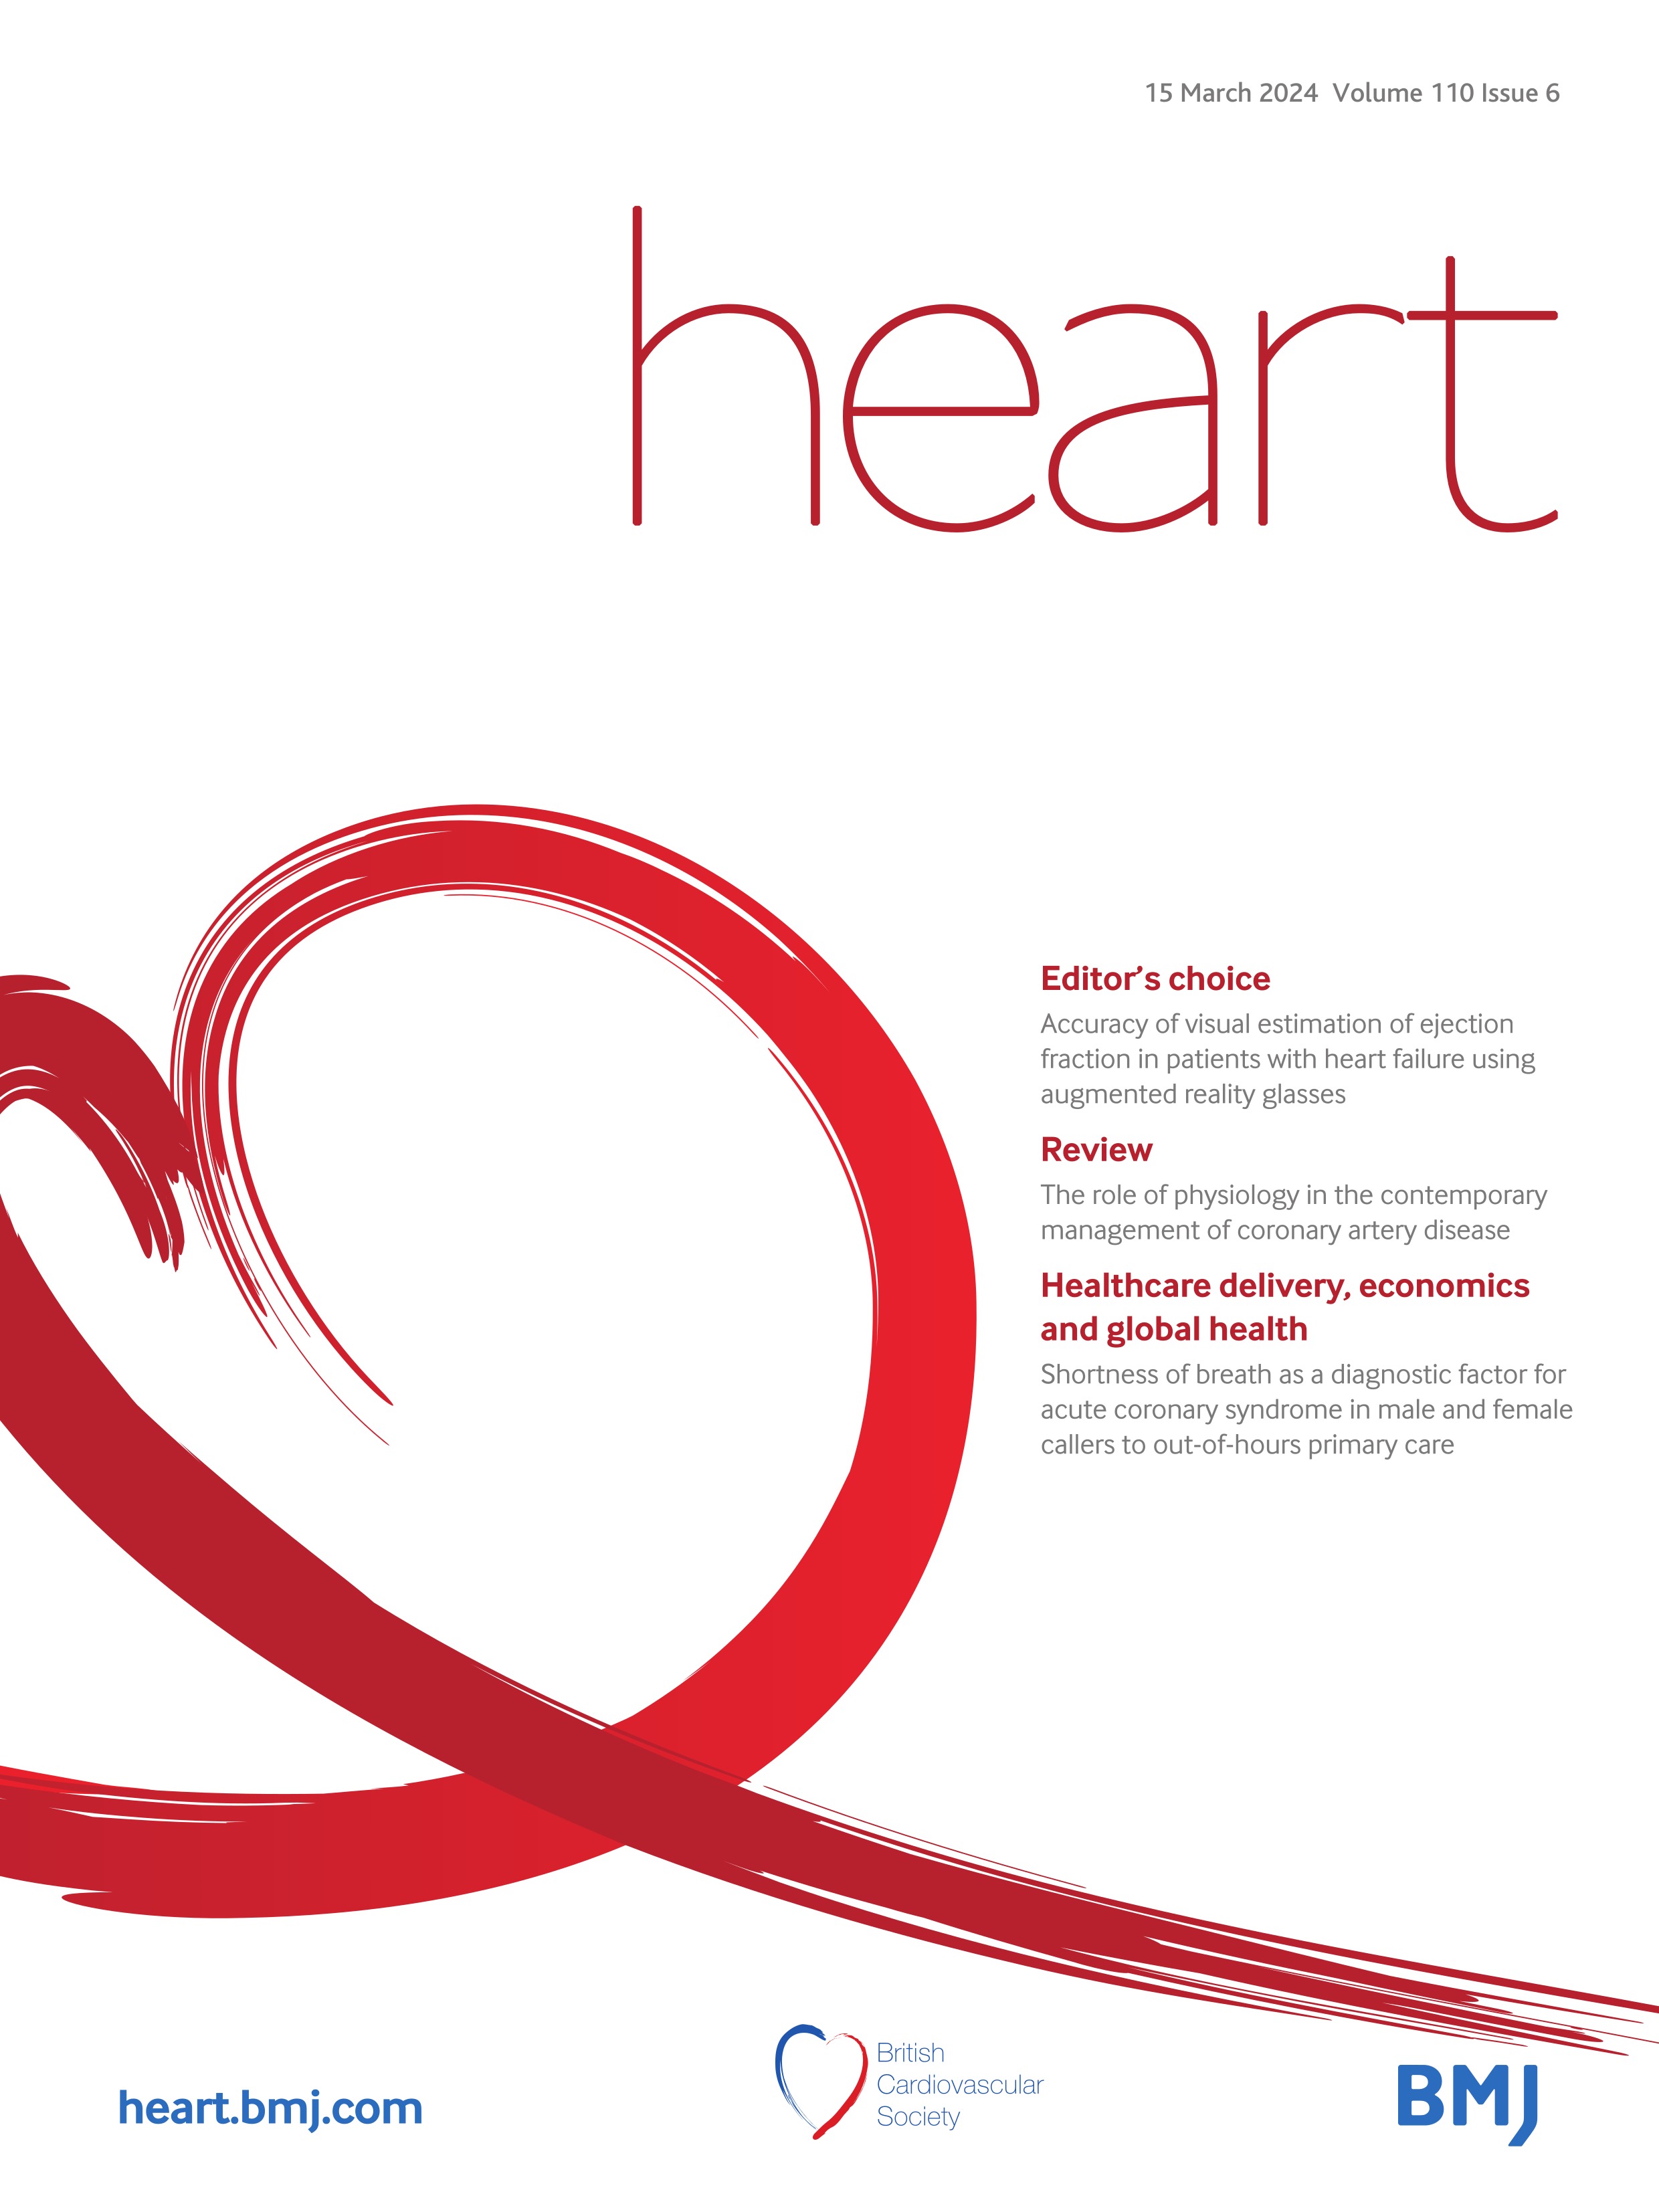 The role of physiology in the contemporary management of coronary artery disease